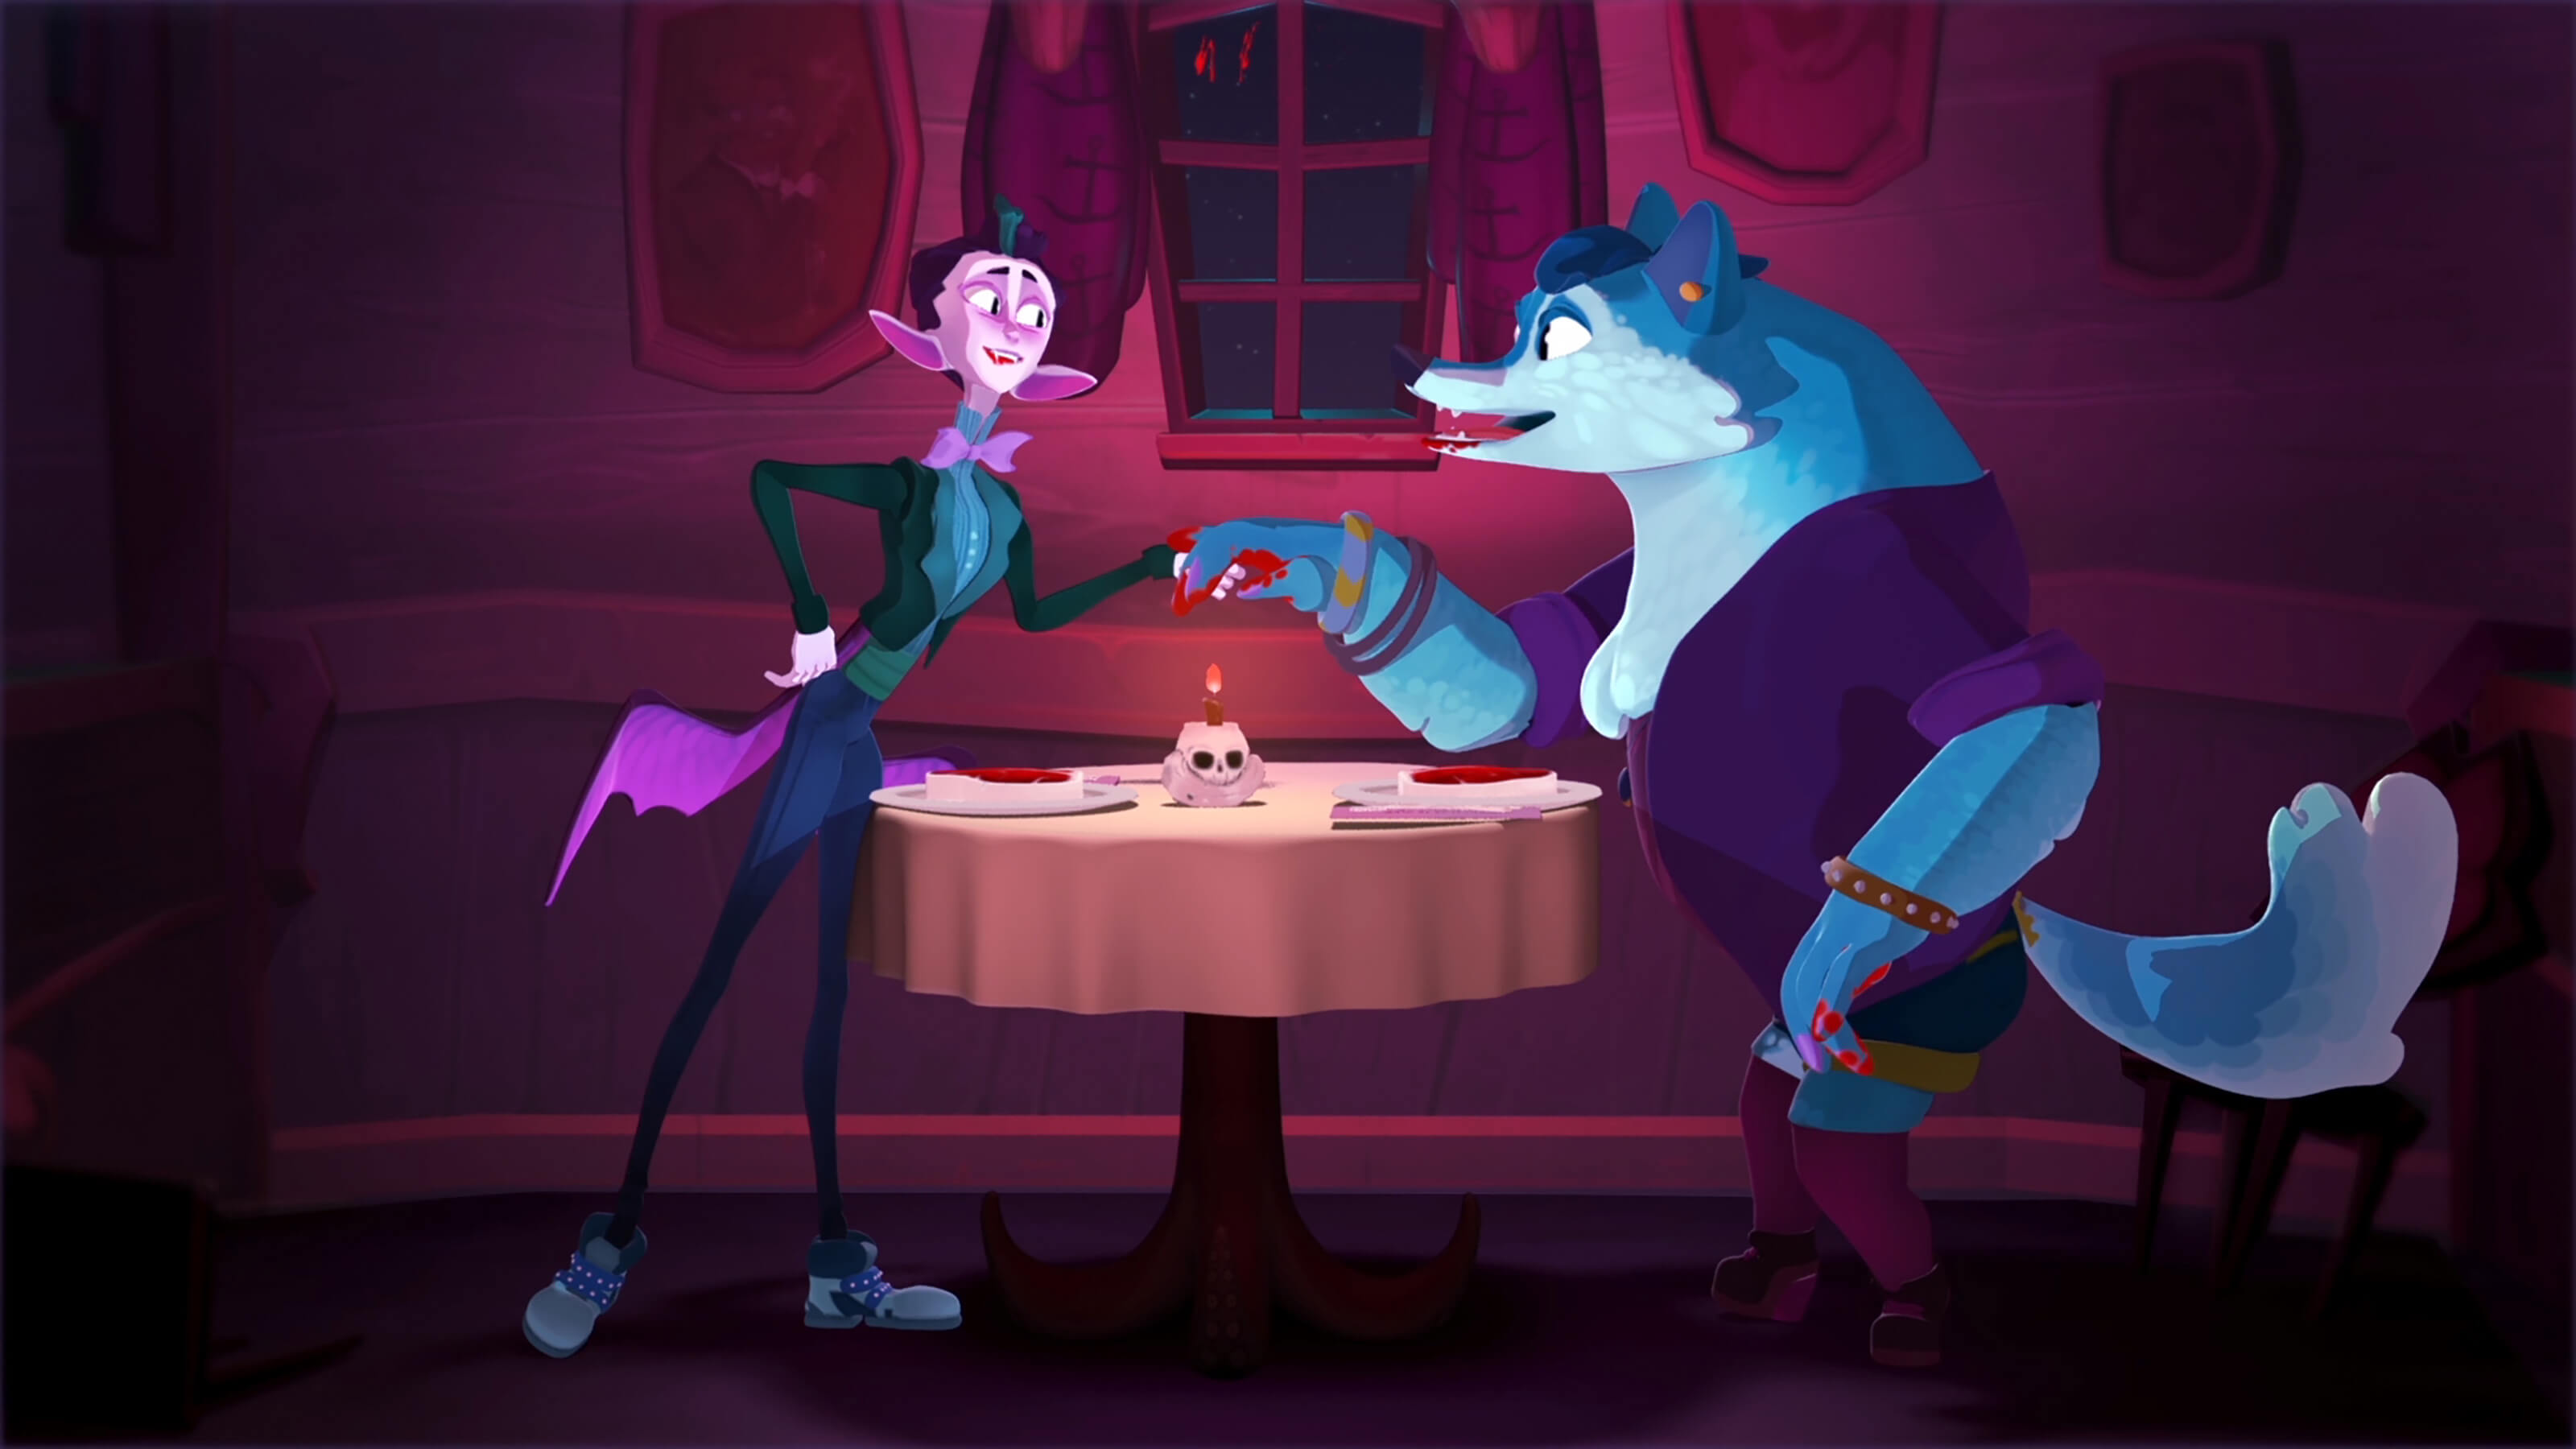 A pink vampire in a suit holds hands with a blue werewolf over a dinner table with two steaks and a lit candle inside a skull